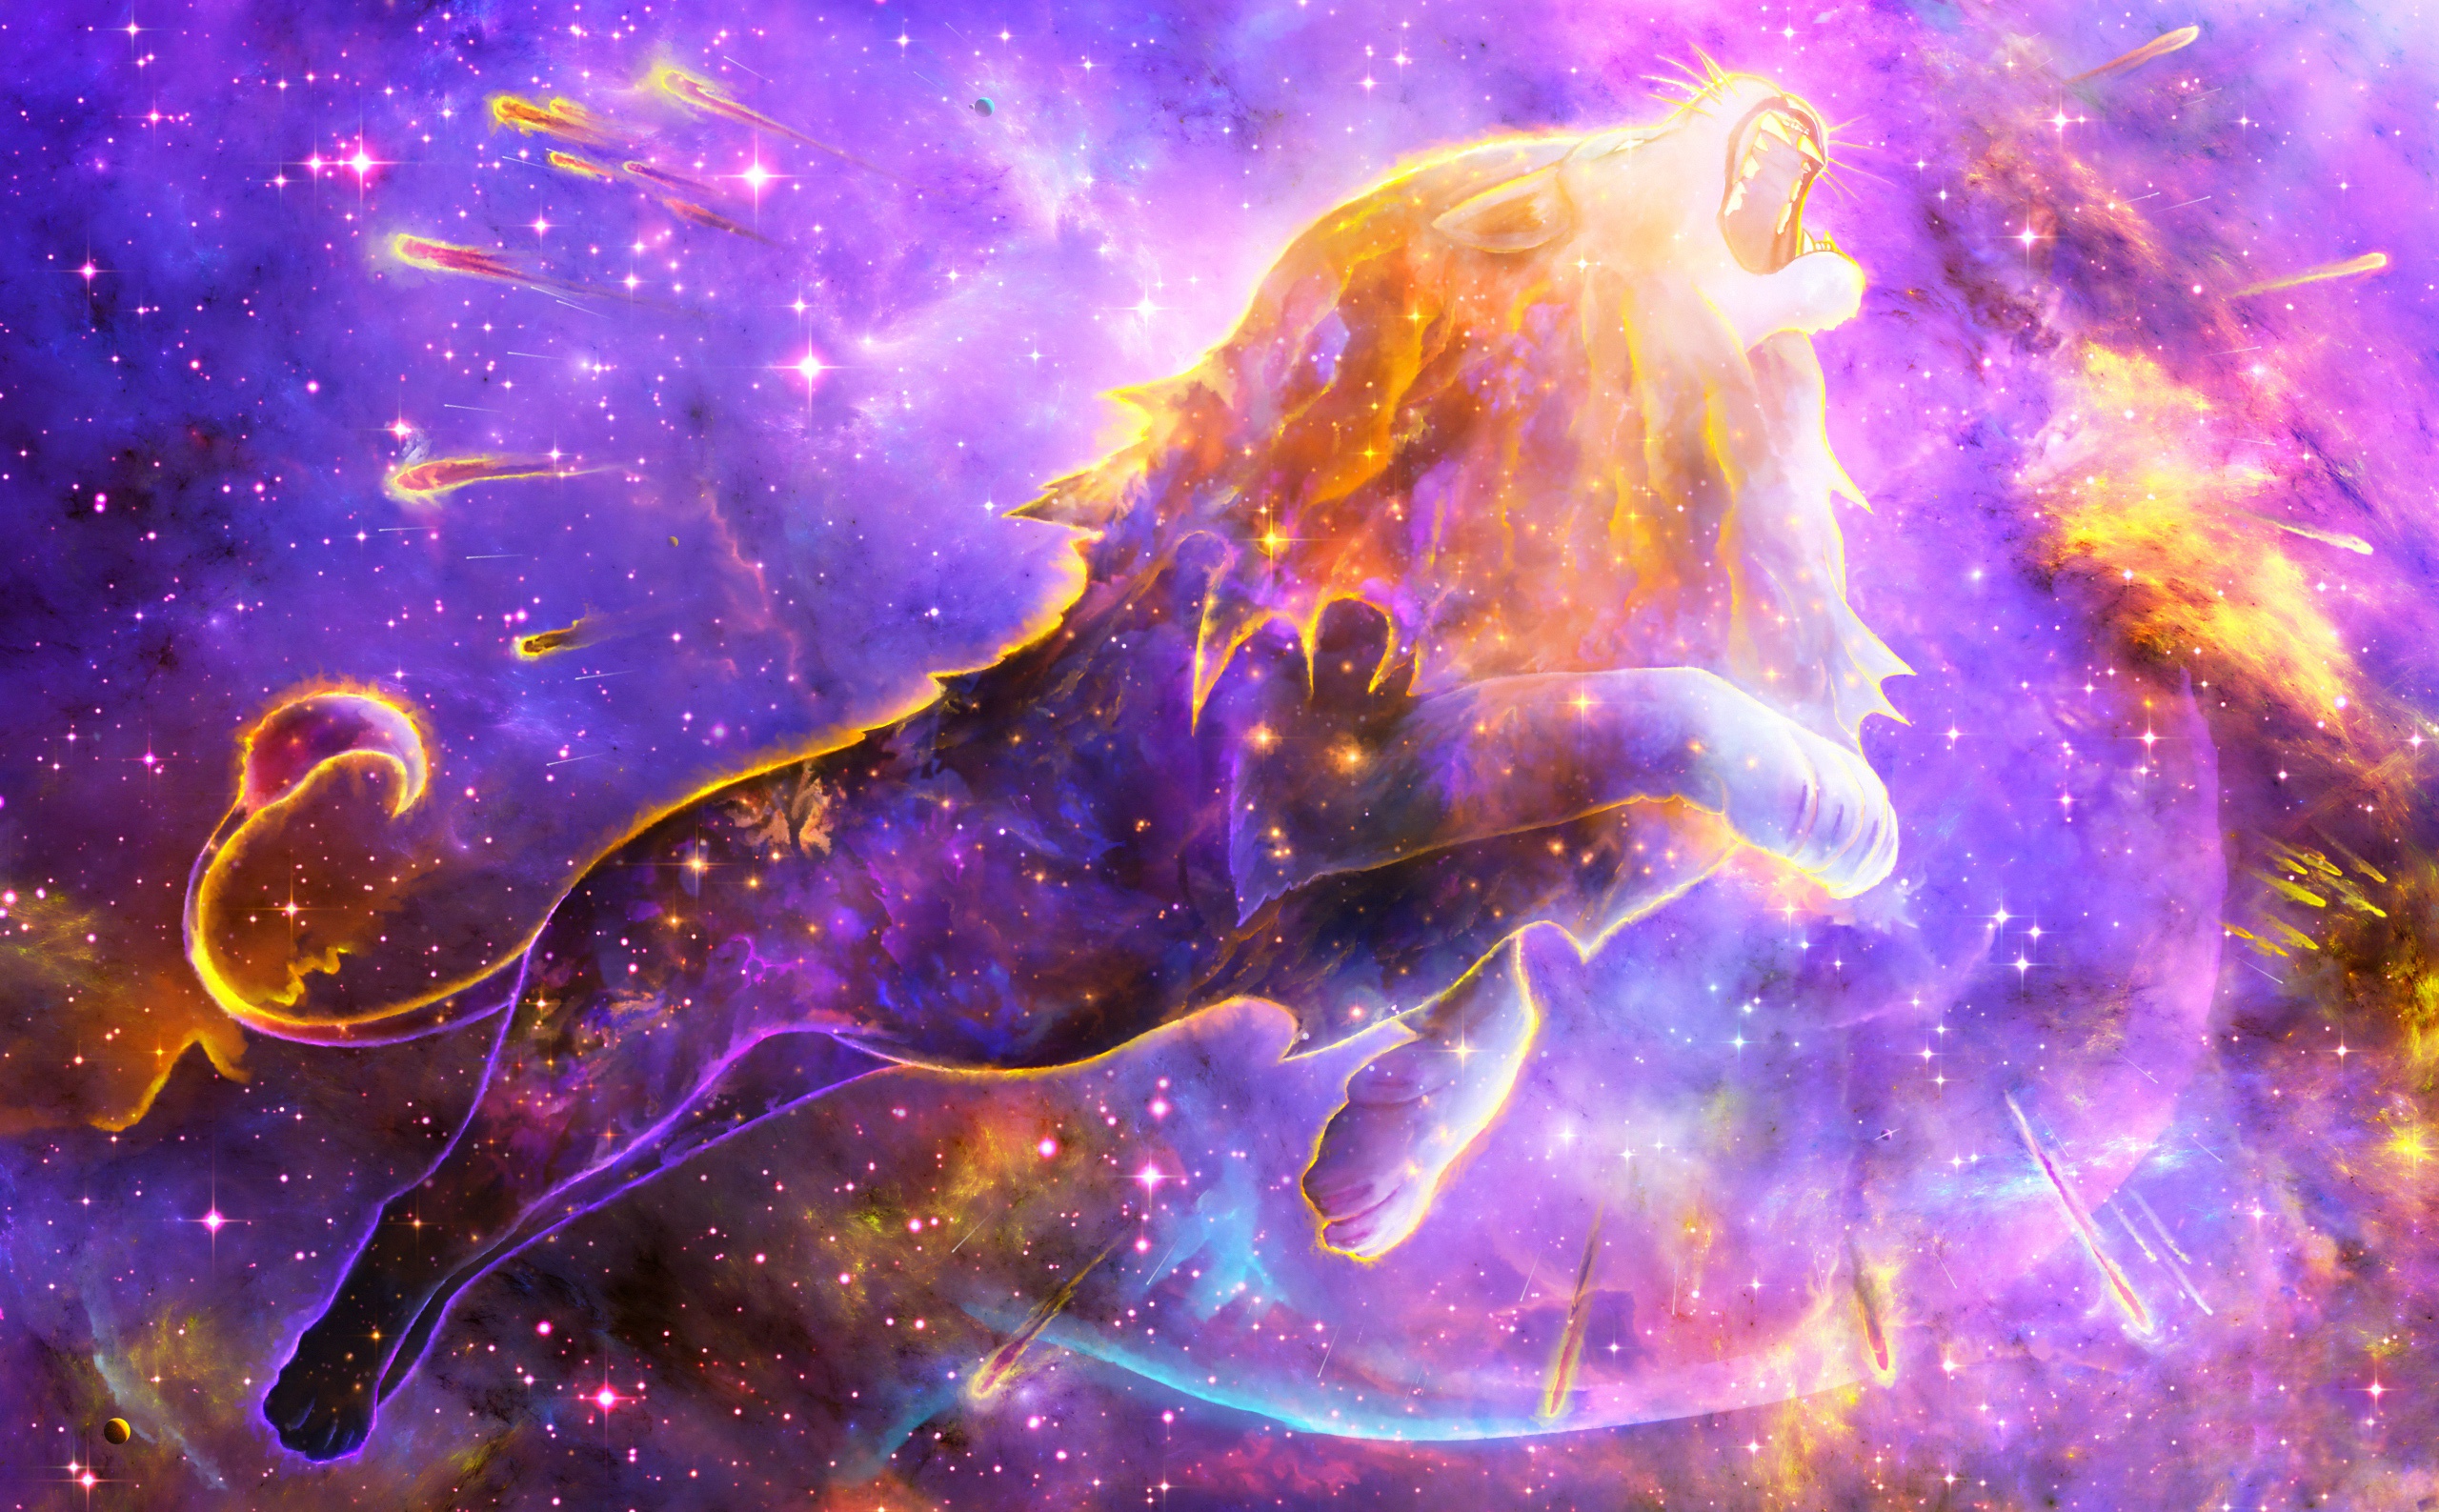 Ile fantasy stars lion nebula space colorful fantasy animals download the picture for free